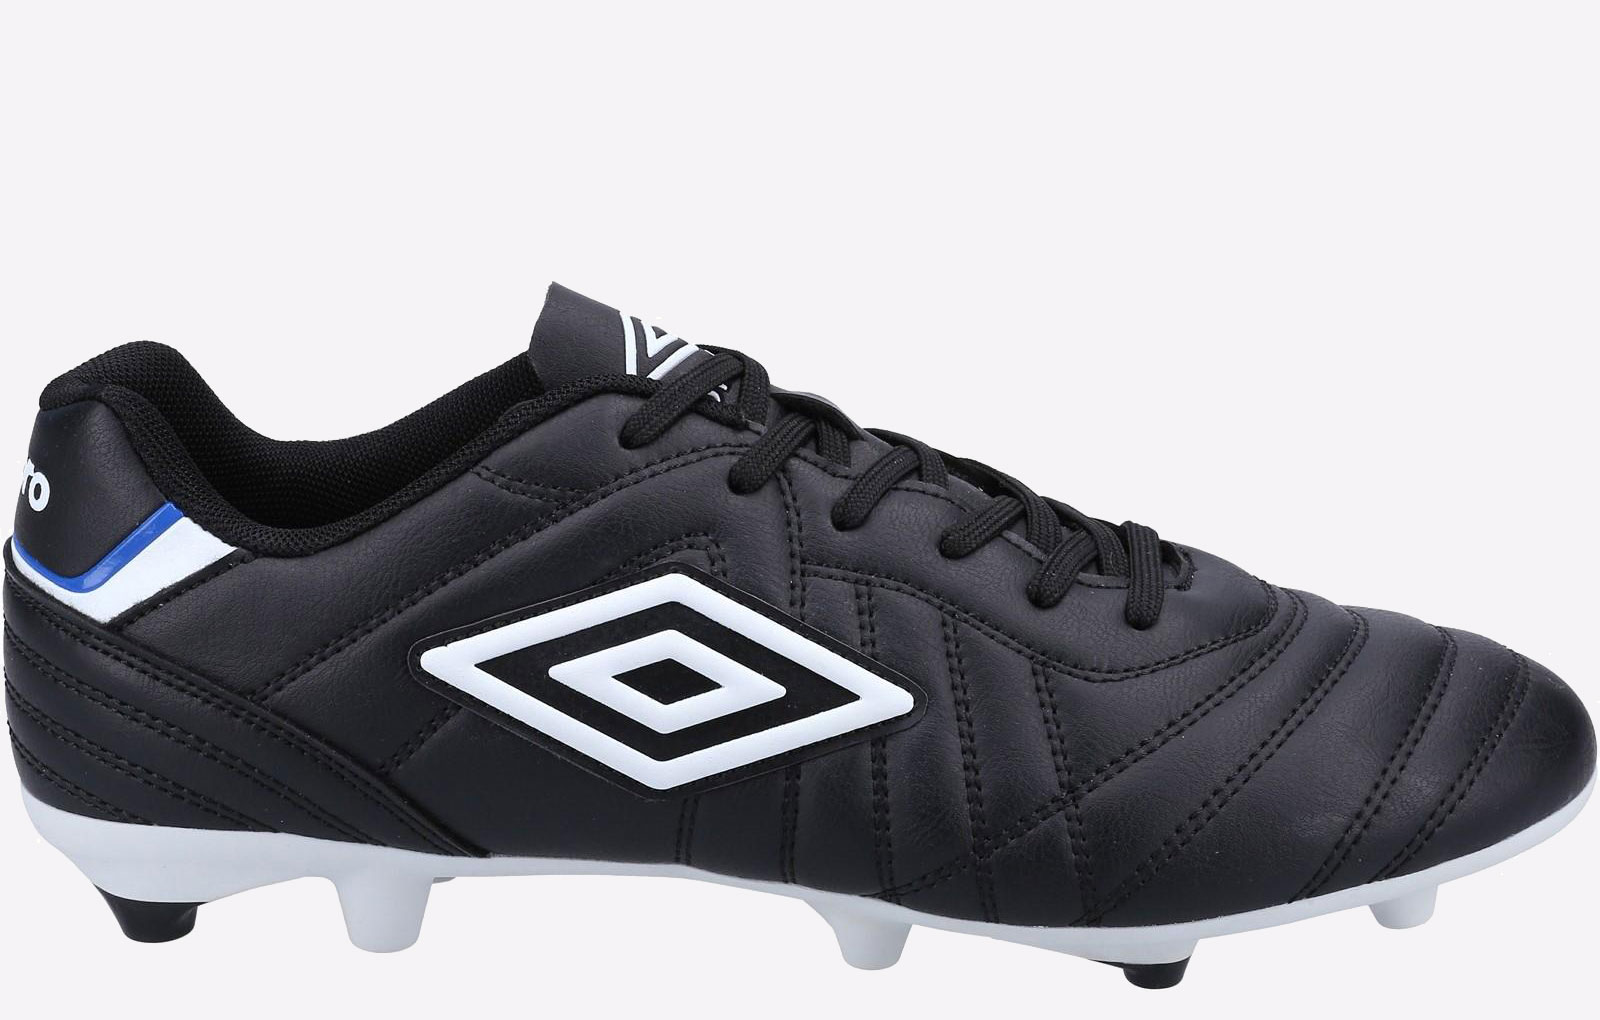 Umbro Speciali Liga Firm Ground Lace up Football Boot Mens  - GRD-35117-65599-13